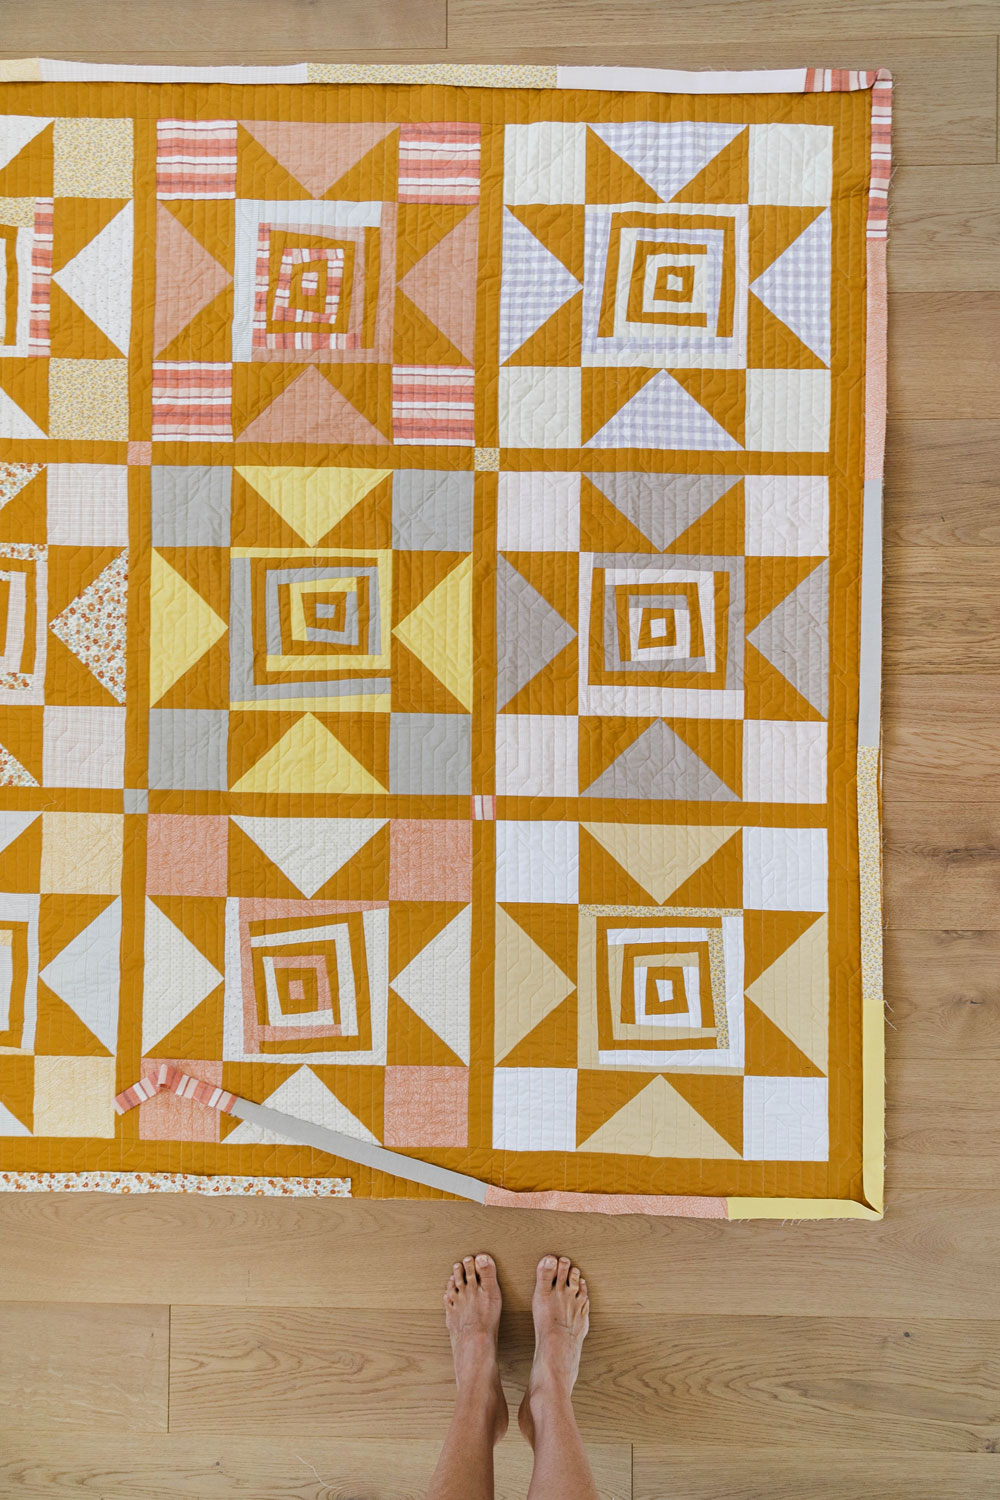 In the final week of the Shining Star quilt sew along we assemble our star blocks and finish the quilt top. Check out my tips for success! suzyquilts.com #sewing #quilting